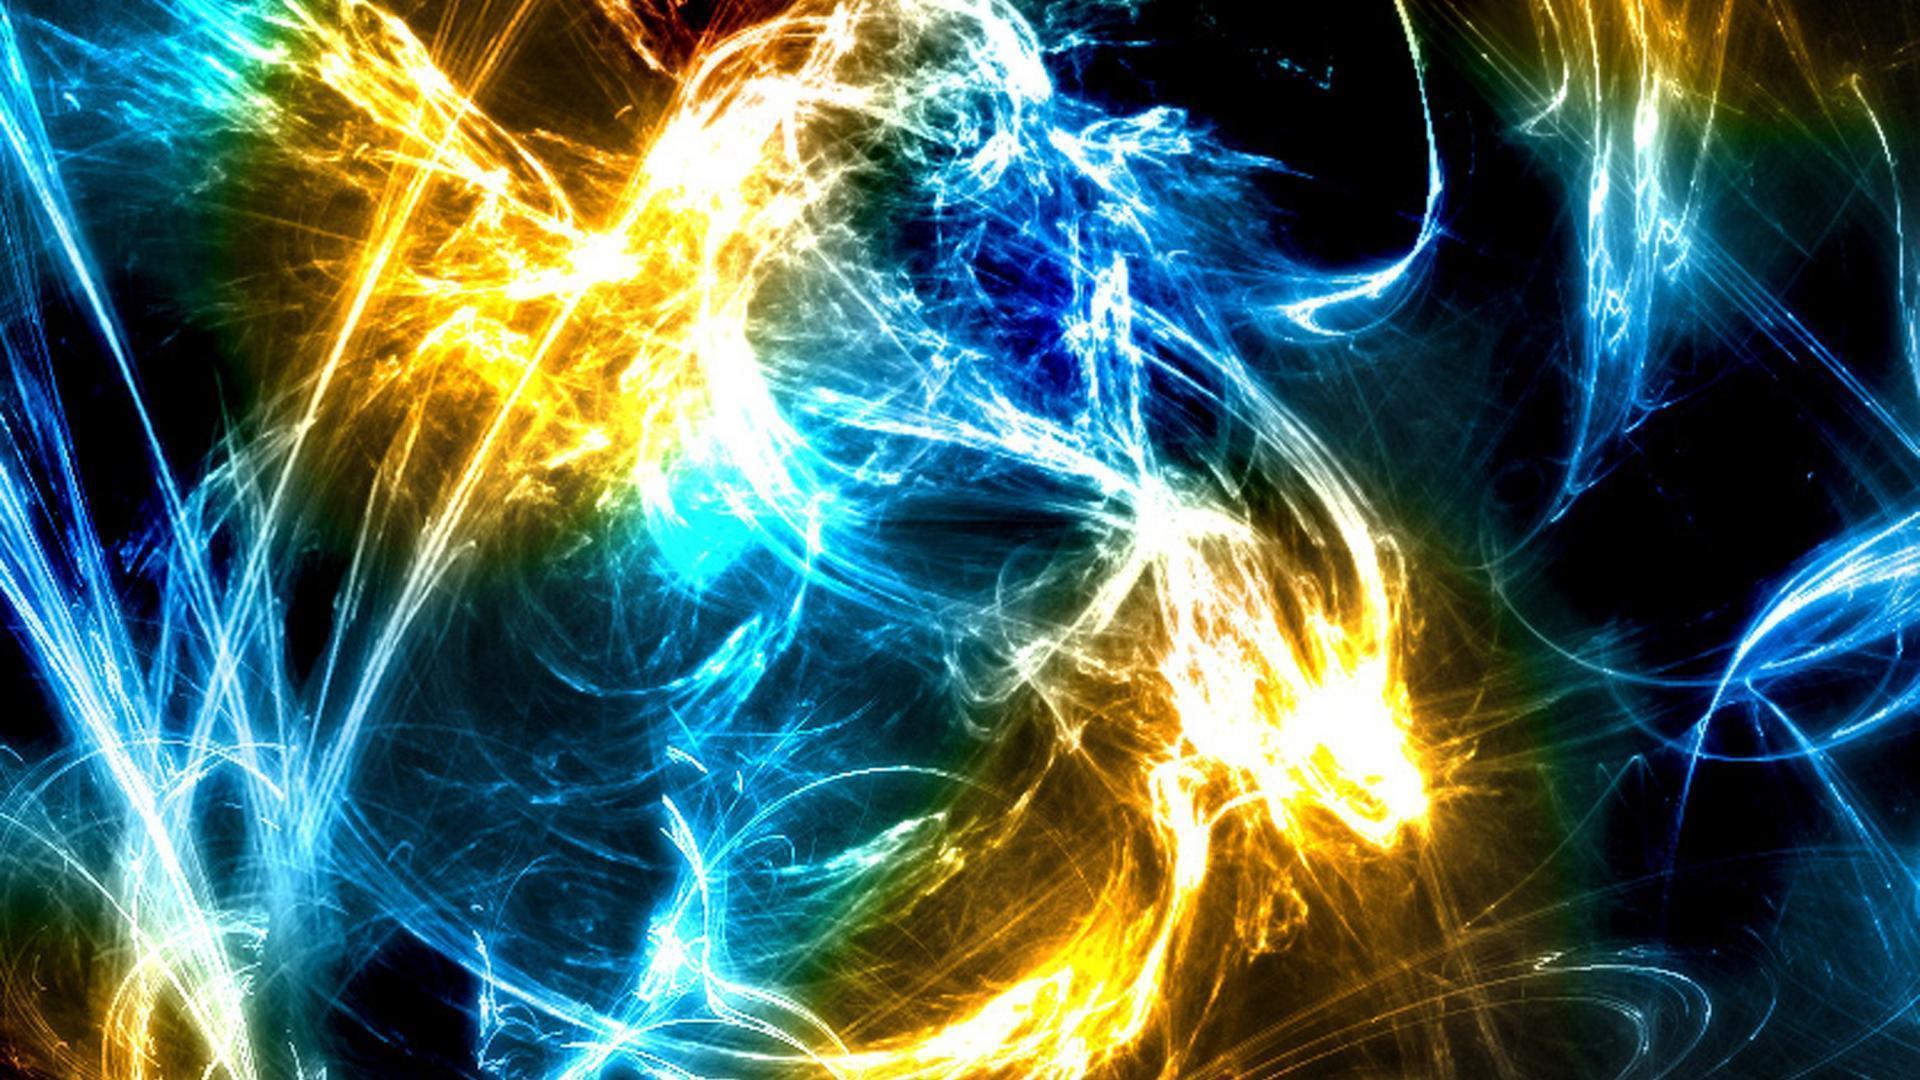 Fire Wallpaper HD Image Amp Picture Becuo and Water 1920x1080PX